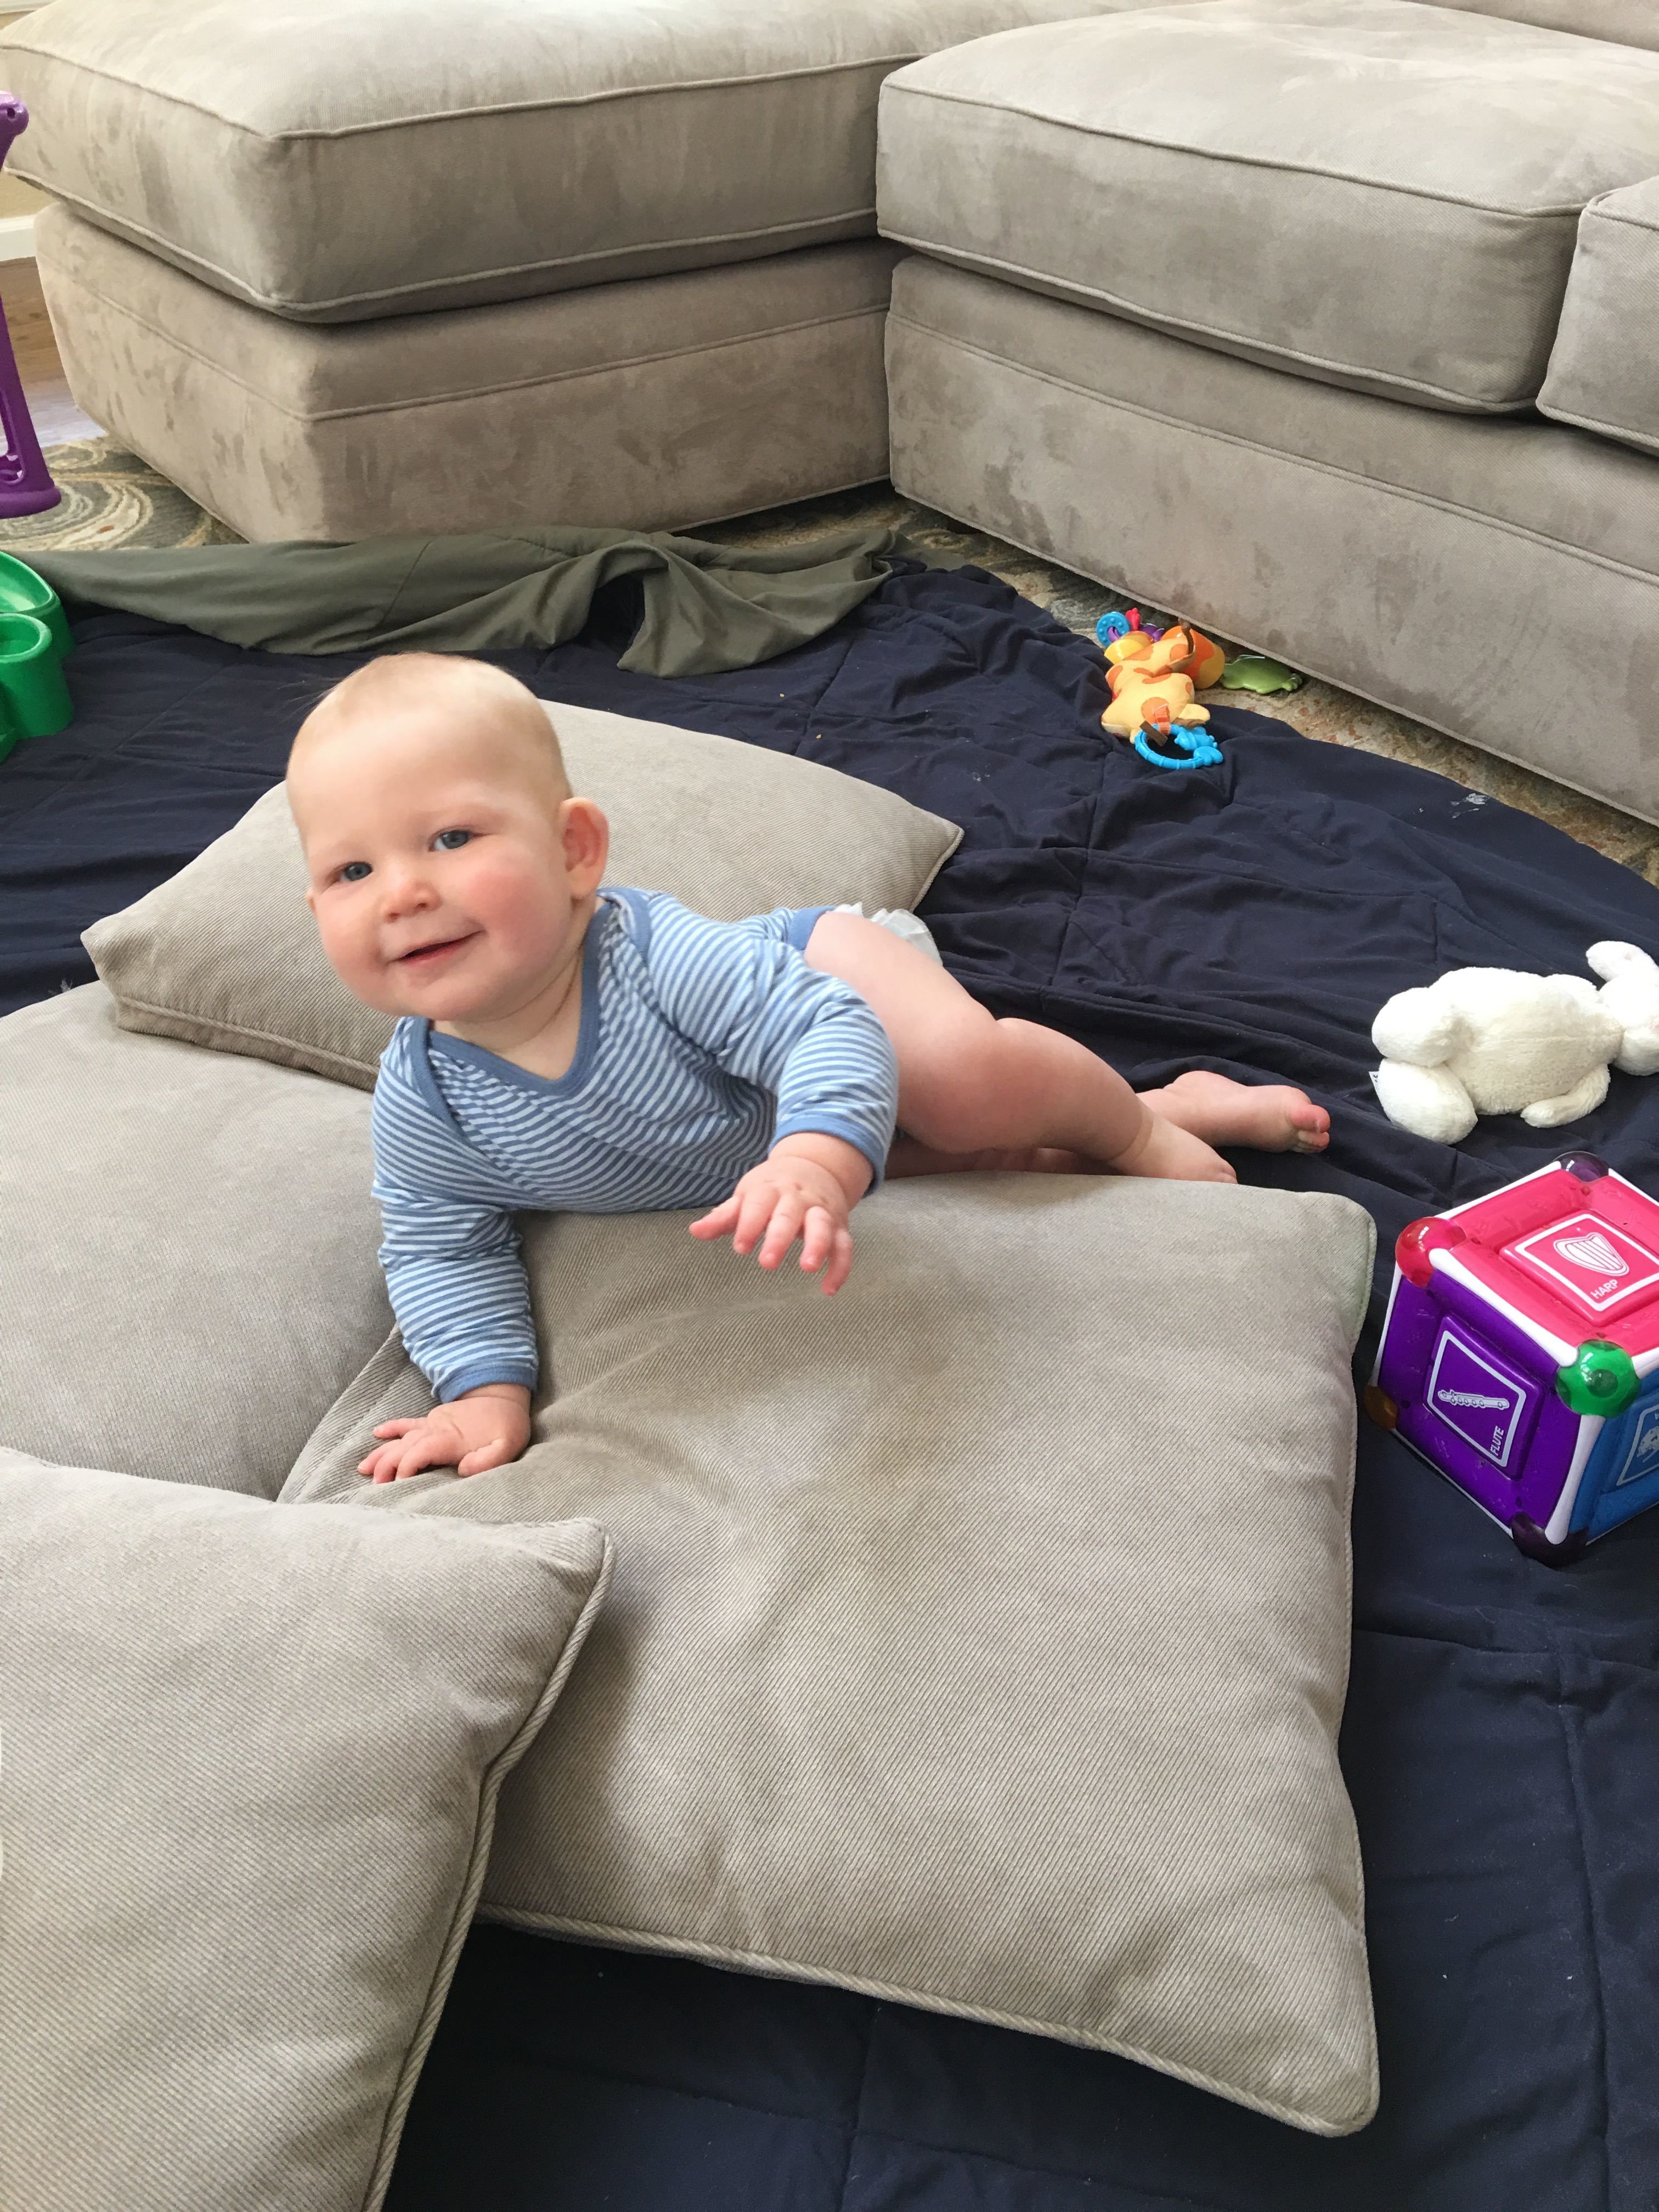 A baby crawls over cushions